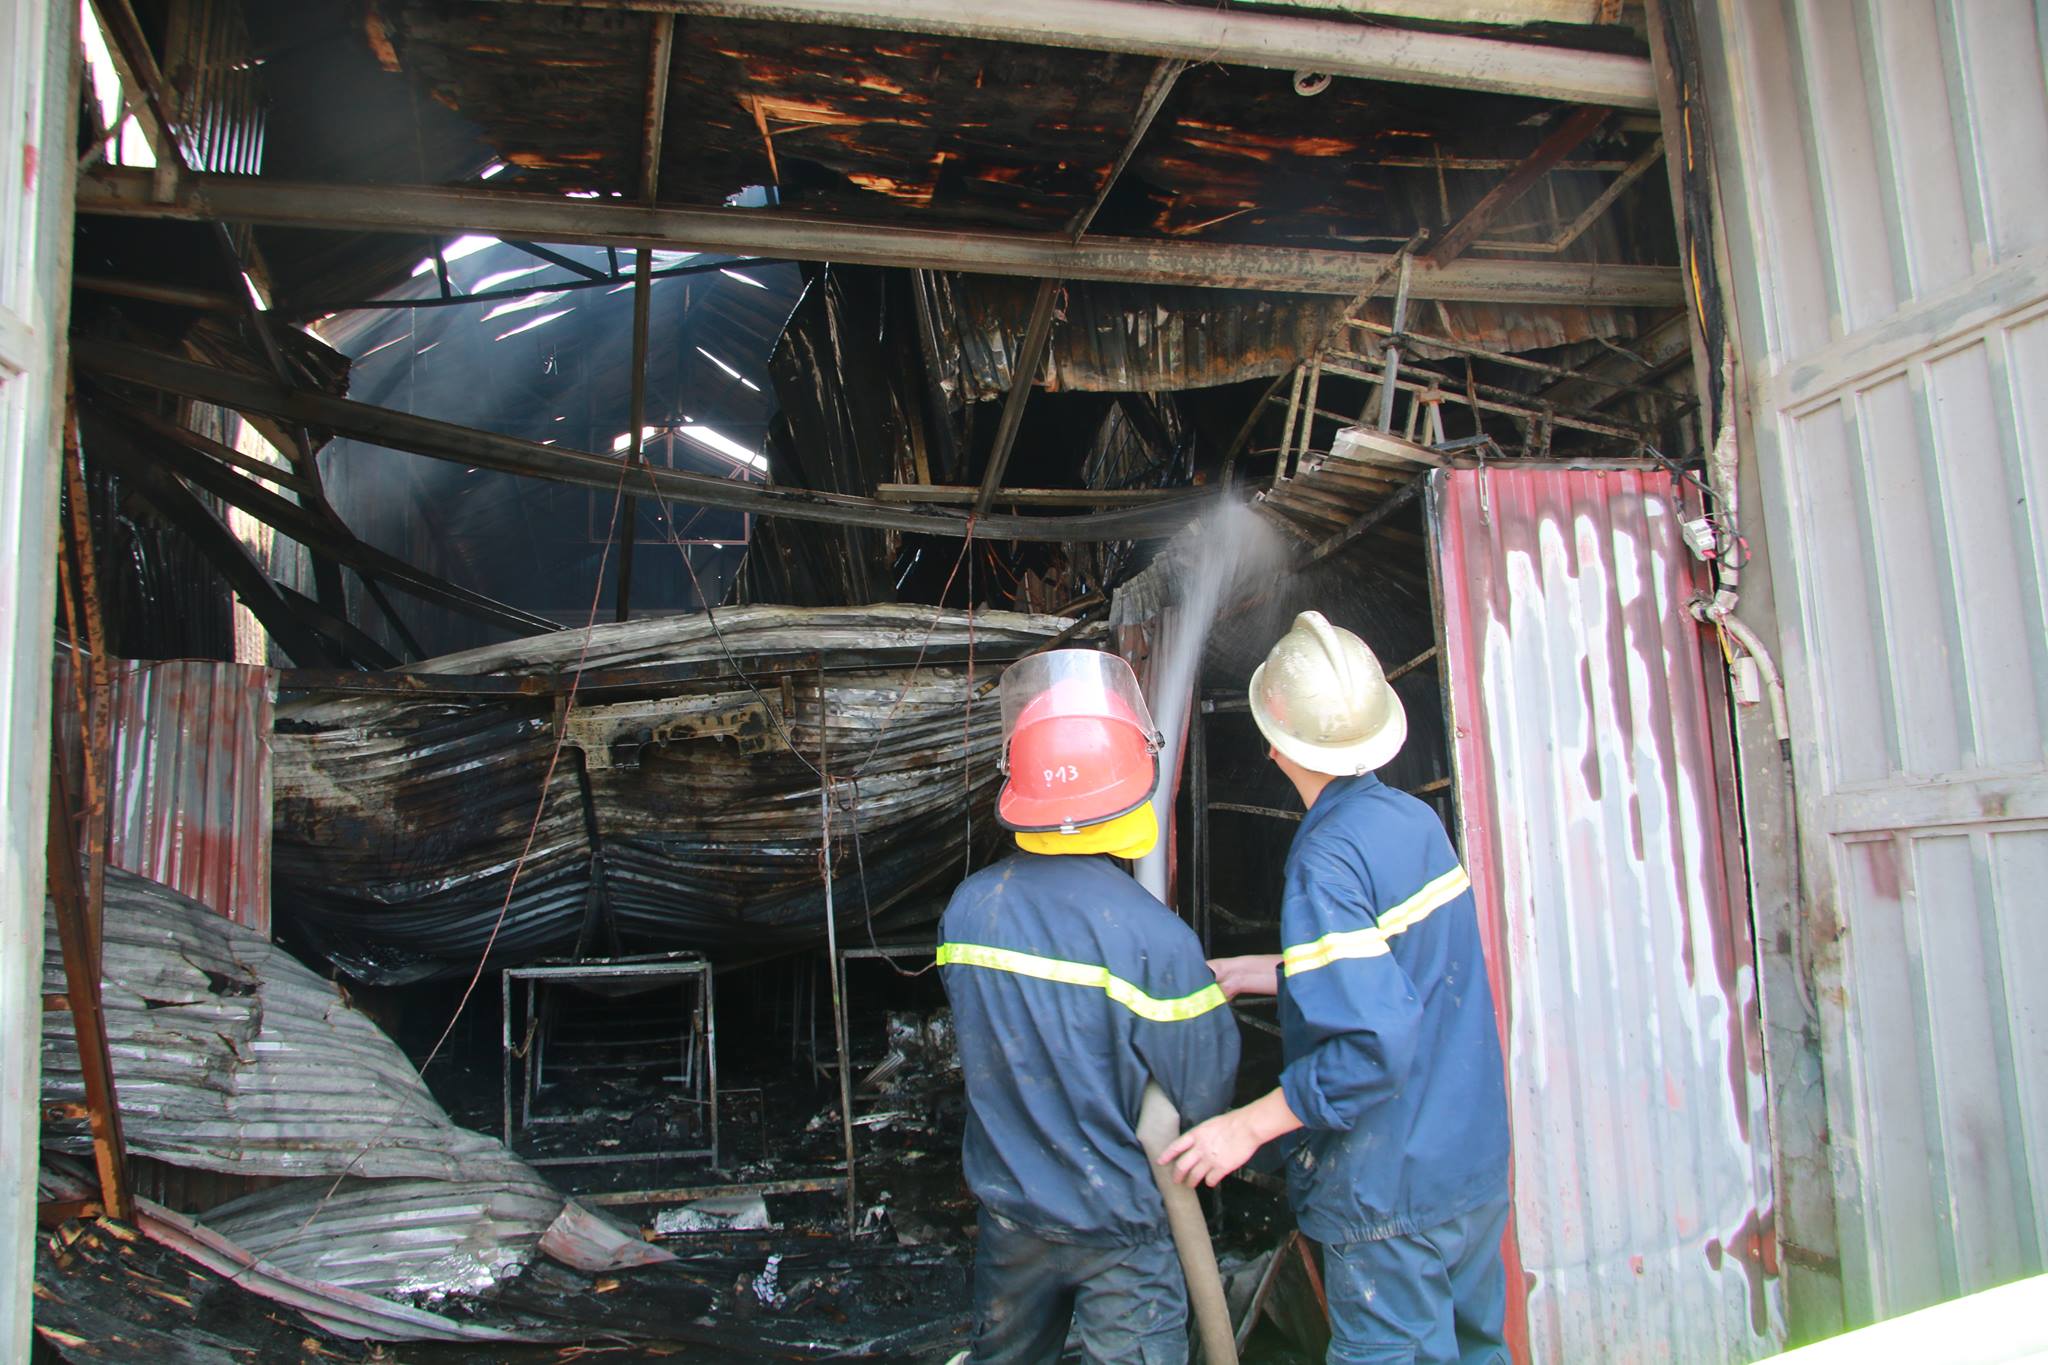 Eight killed as fire devours baking facility in Hanoi